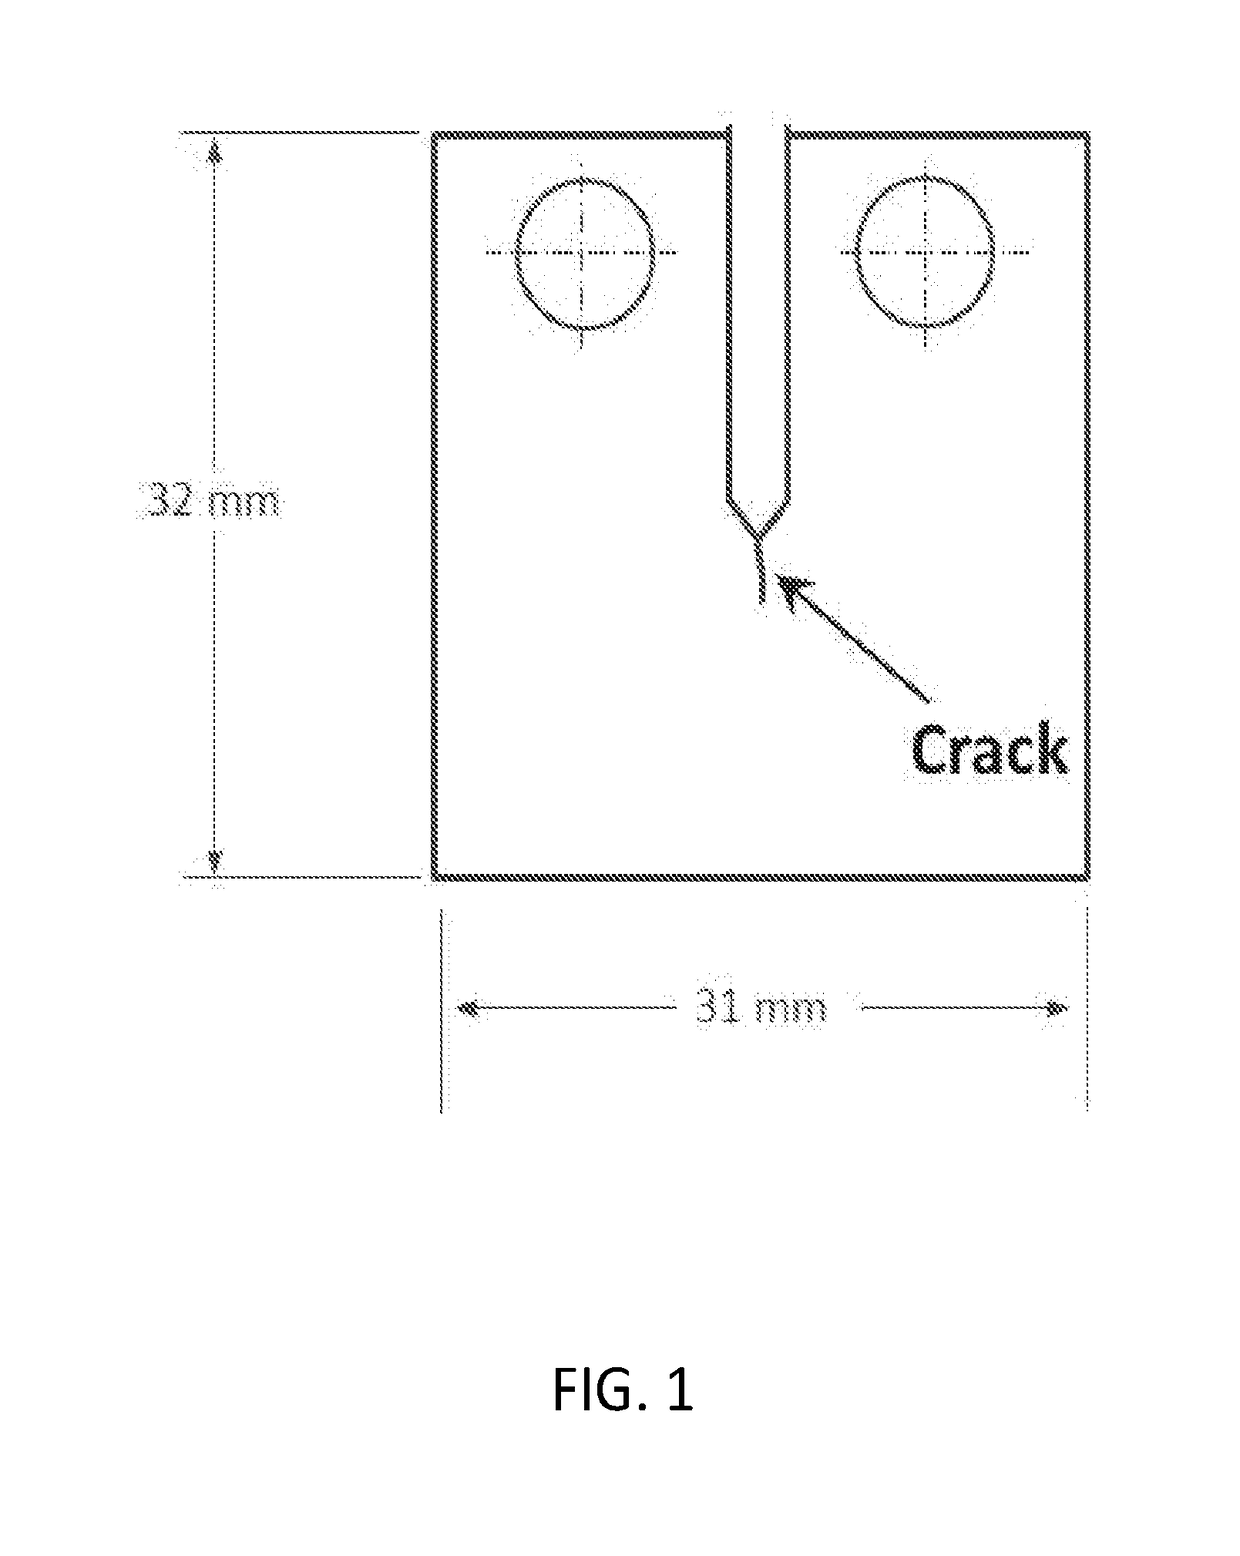 Drop weight tower for crack initiation in fracture mechanics samples